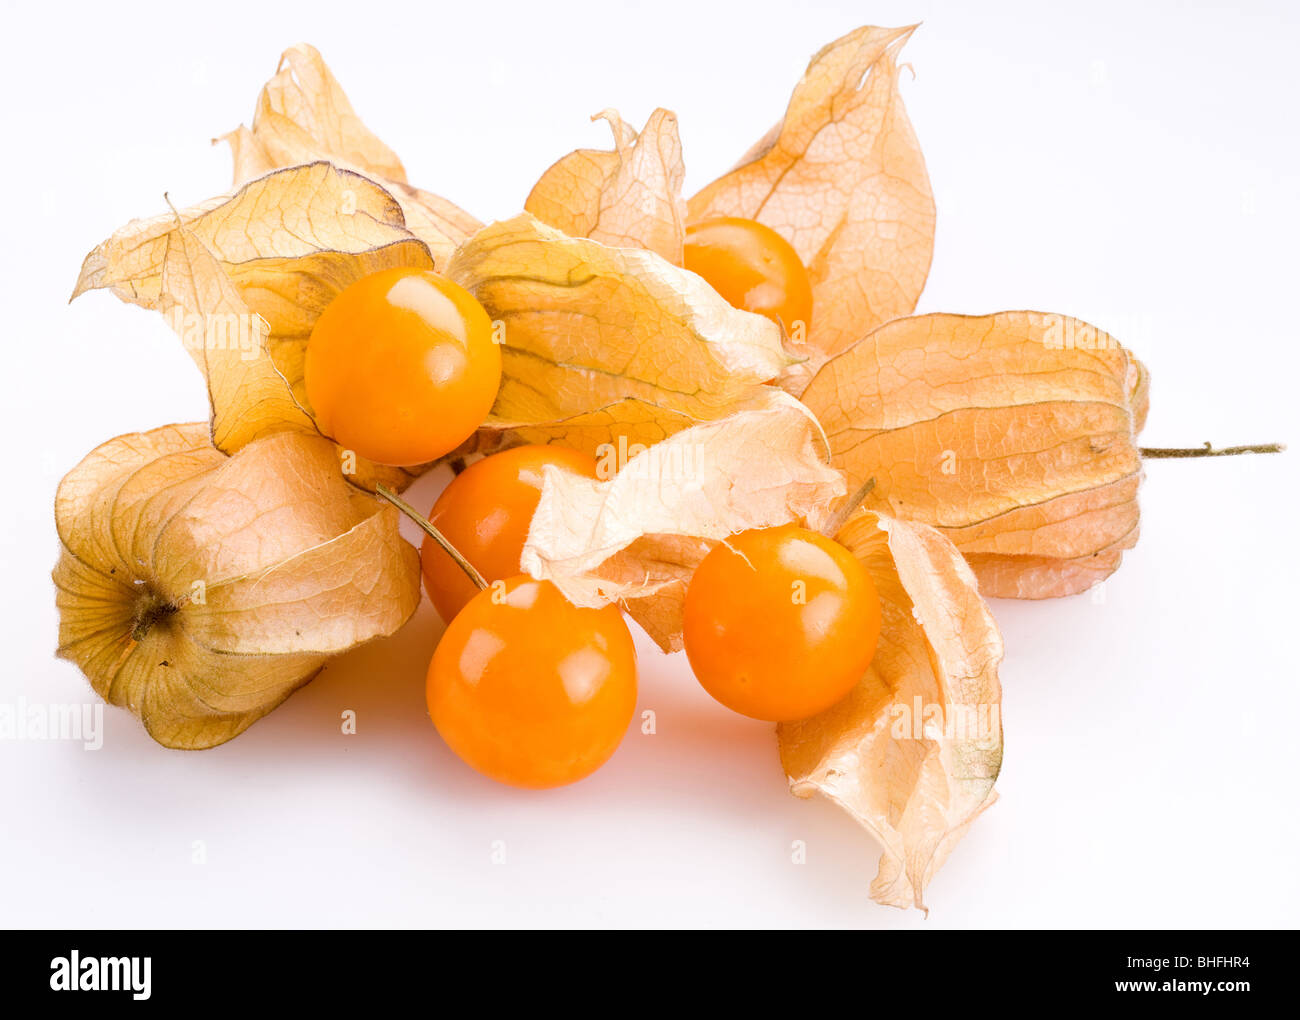 Physalis on a white background Stock Photo